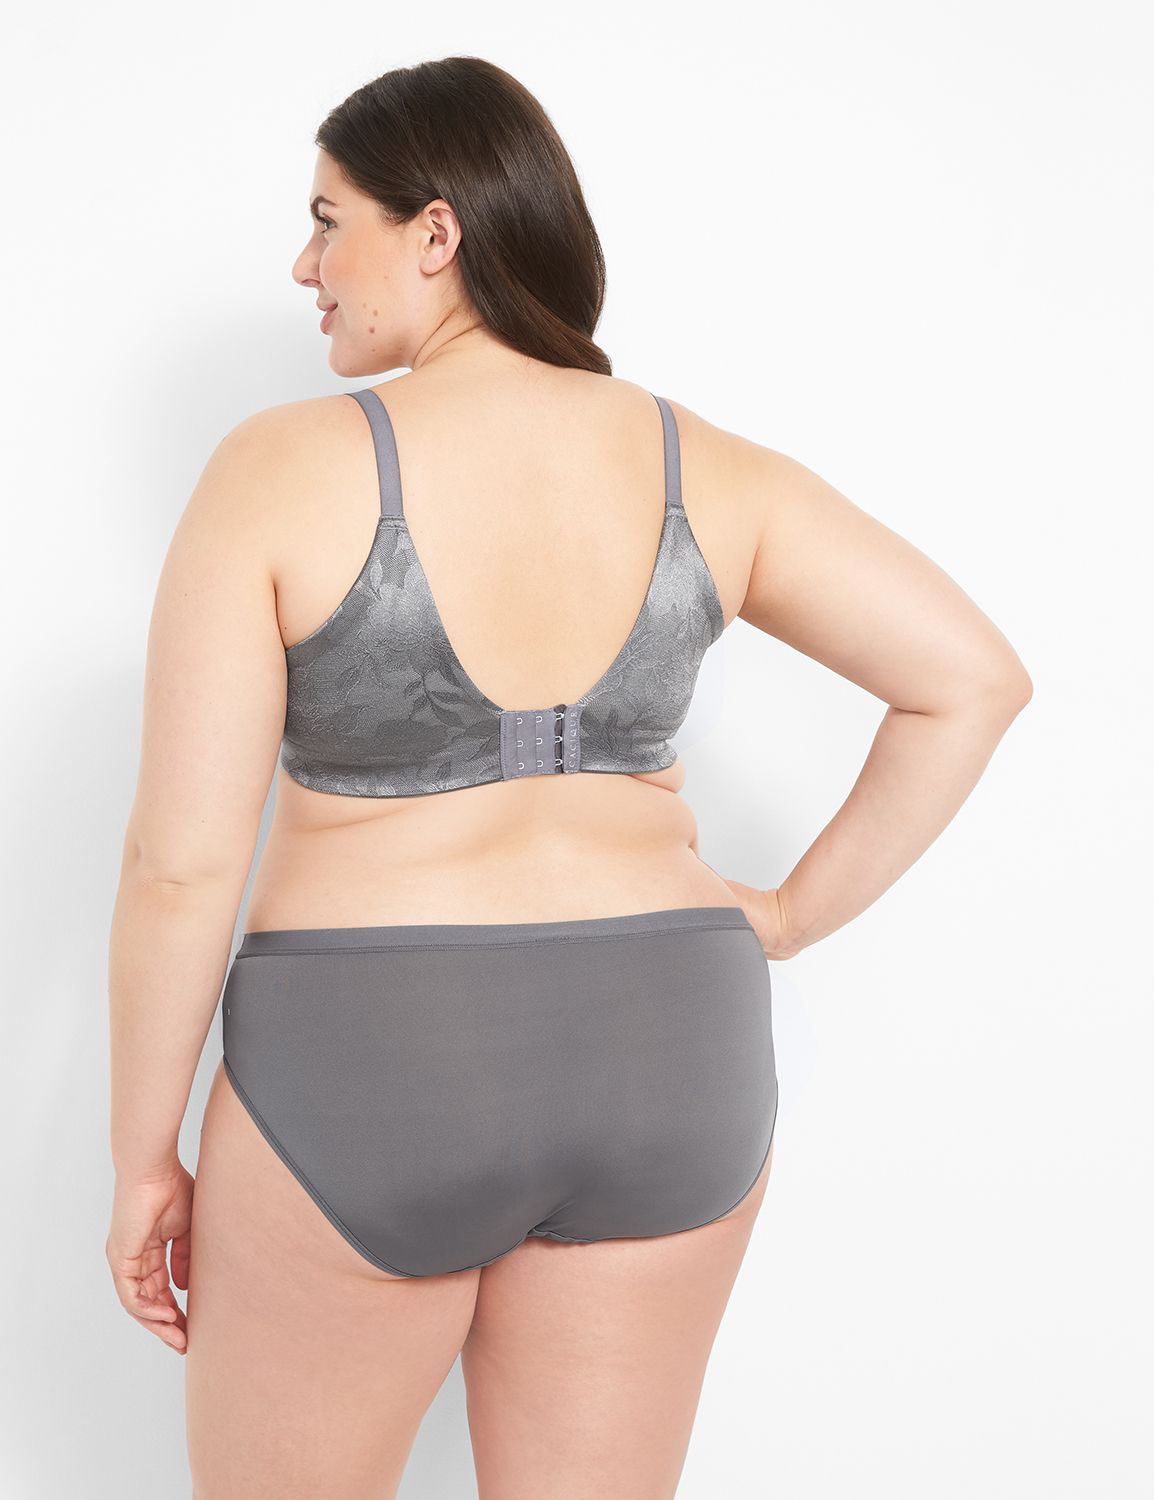 Lane Bryant - Life-changing Backsmoother bras for just $30